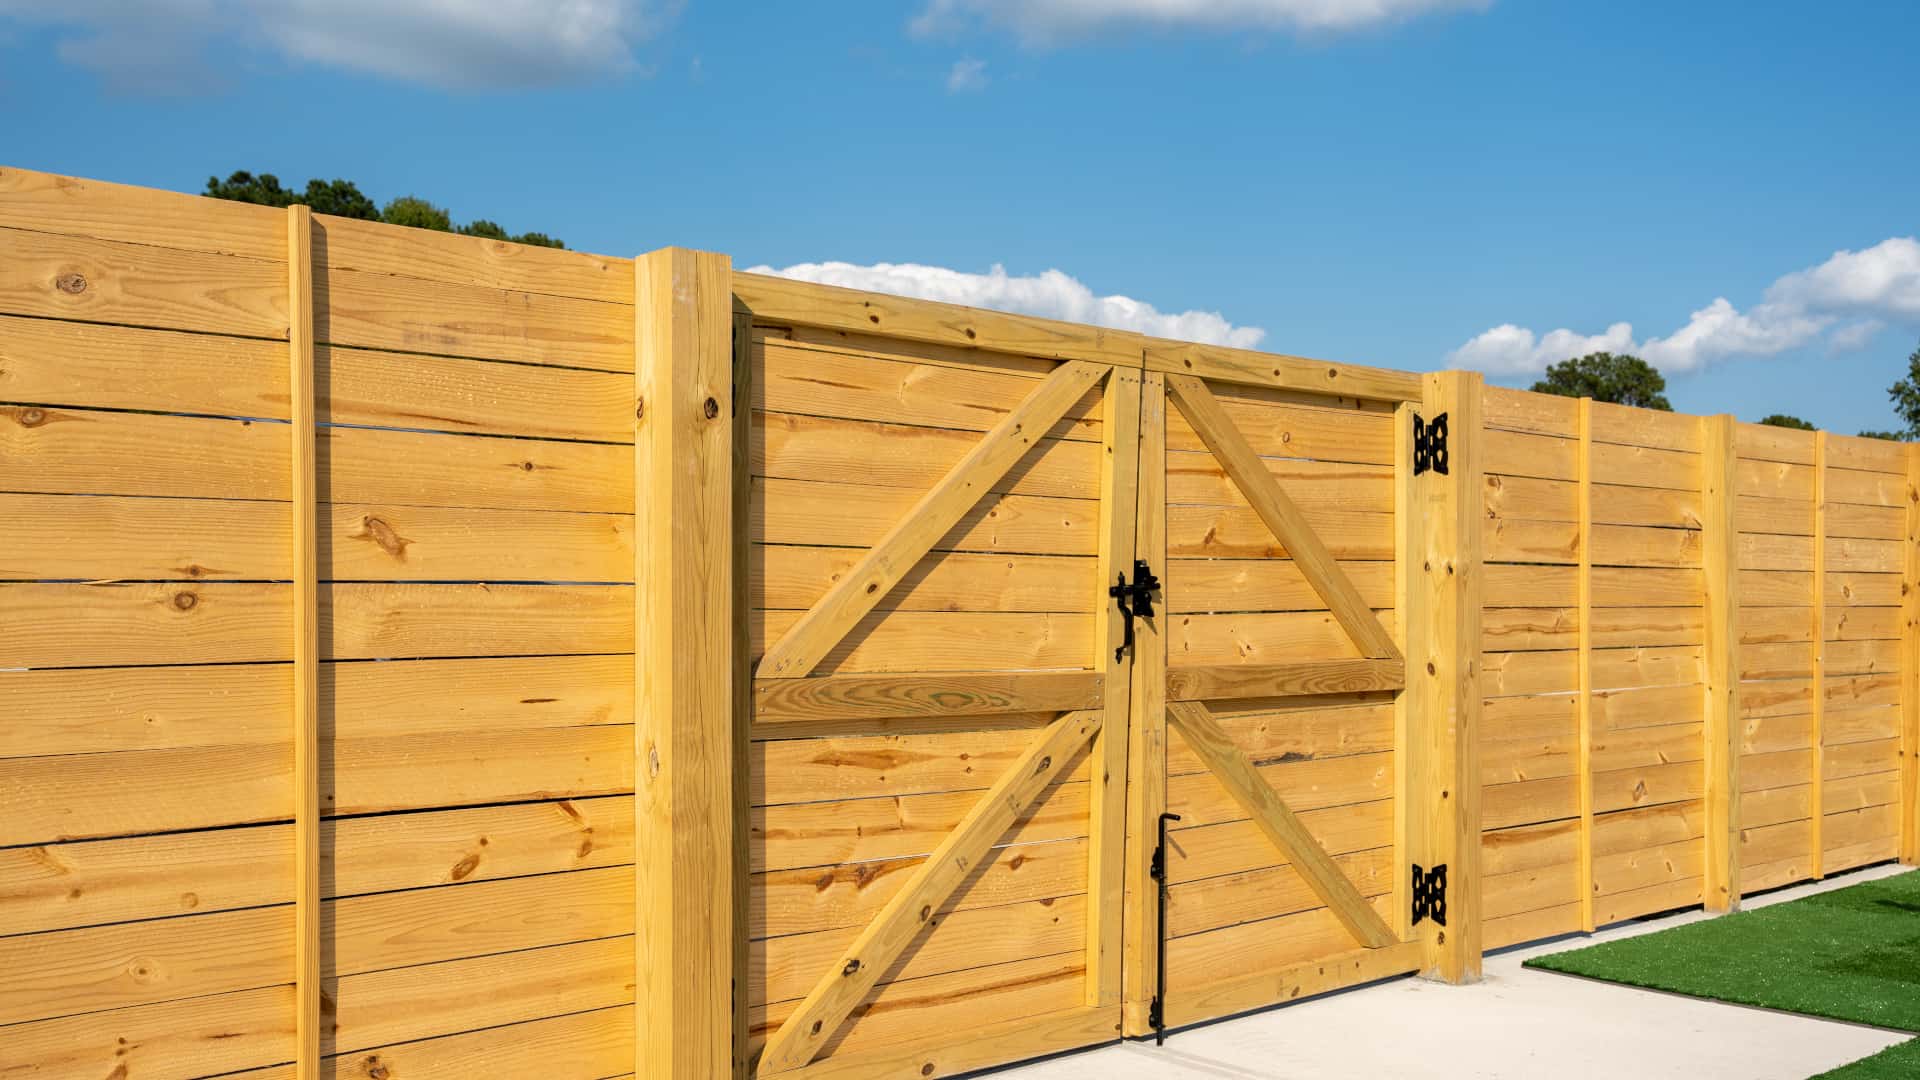 How to Tell When Your Property Needs Keller Fence Repair